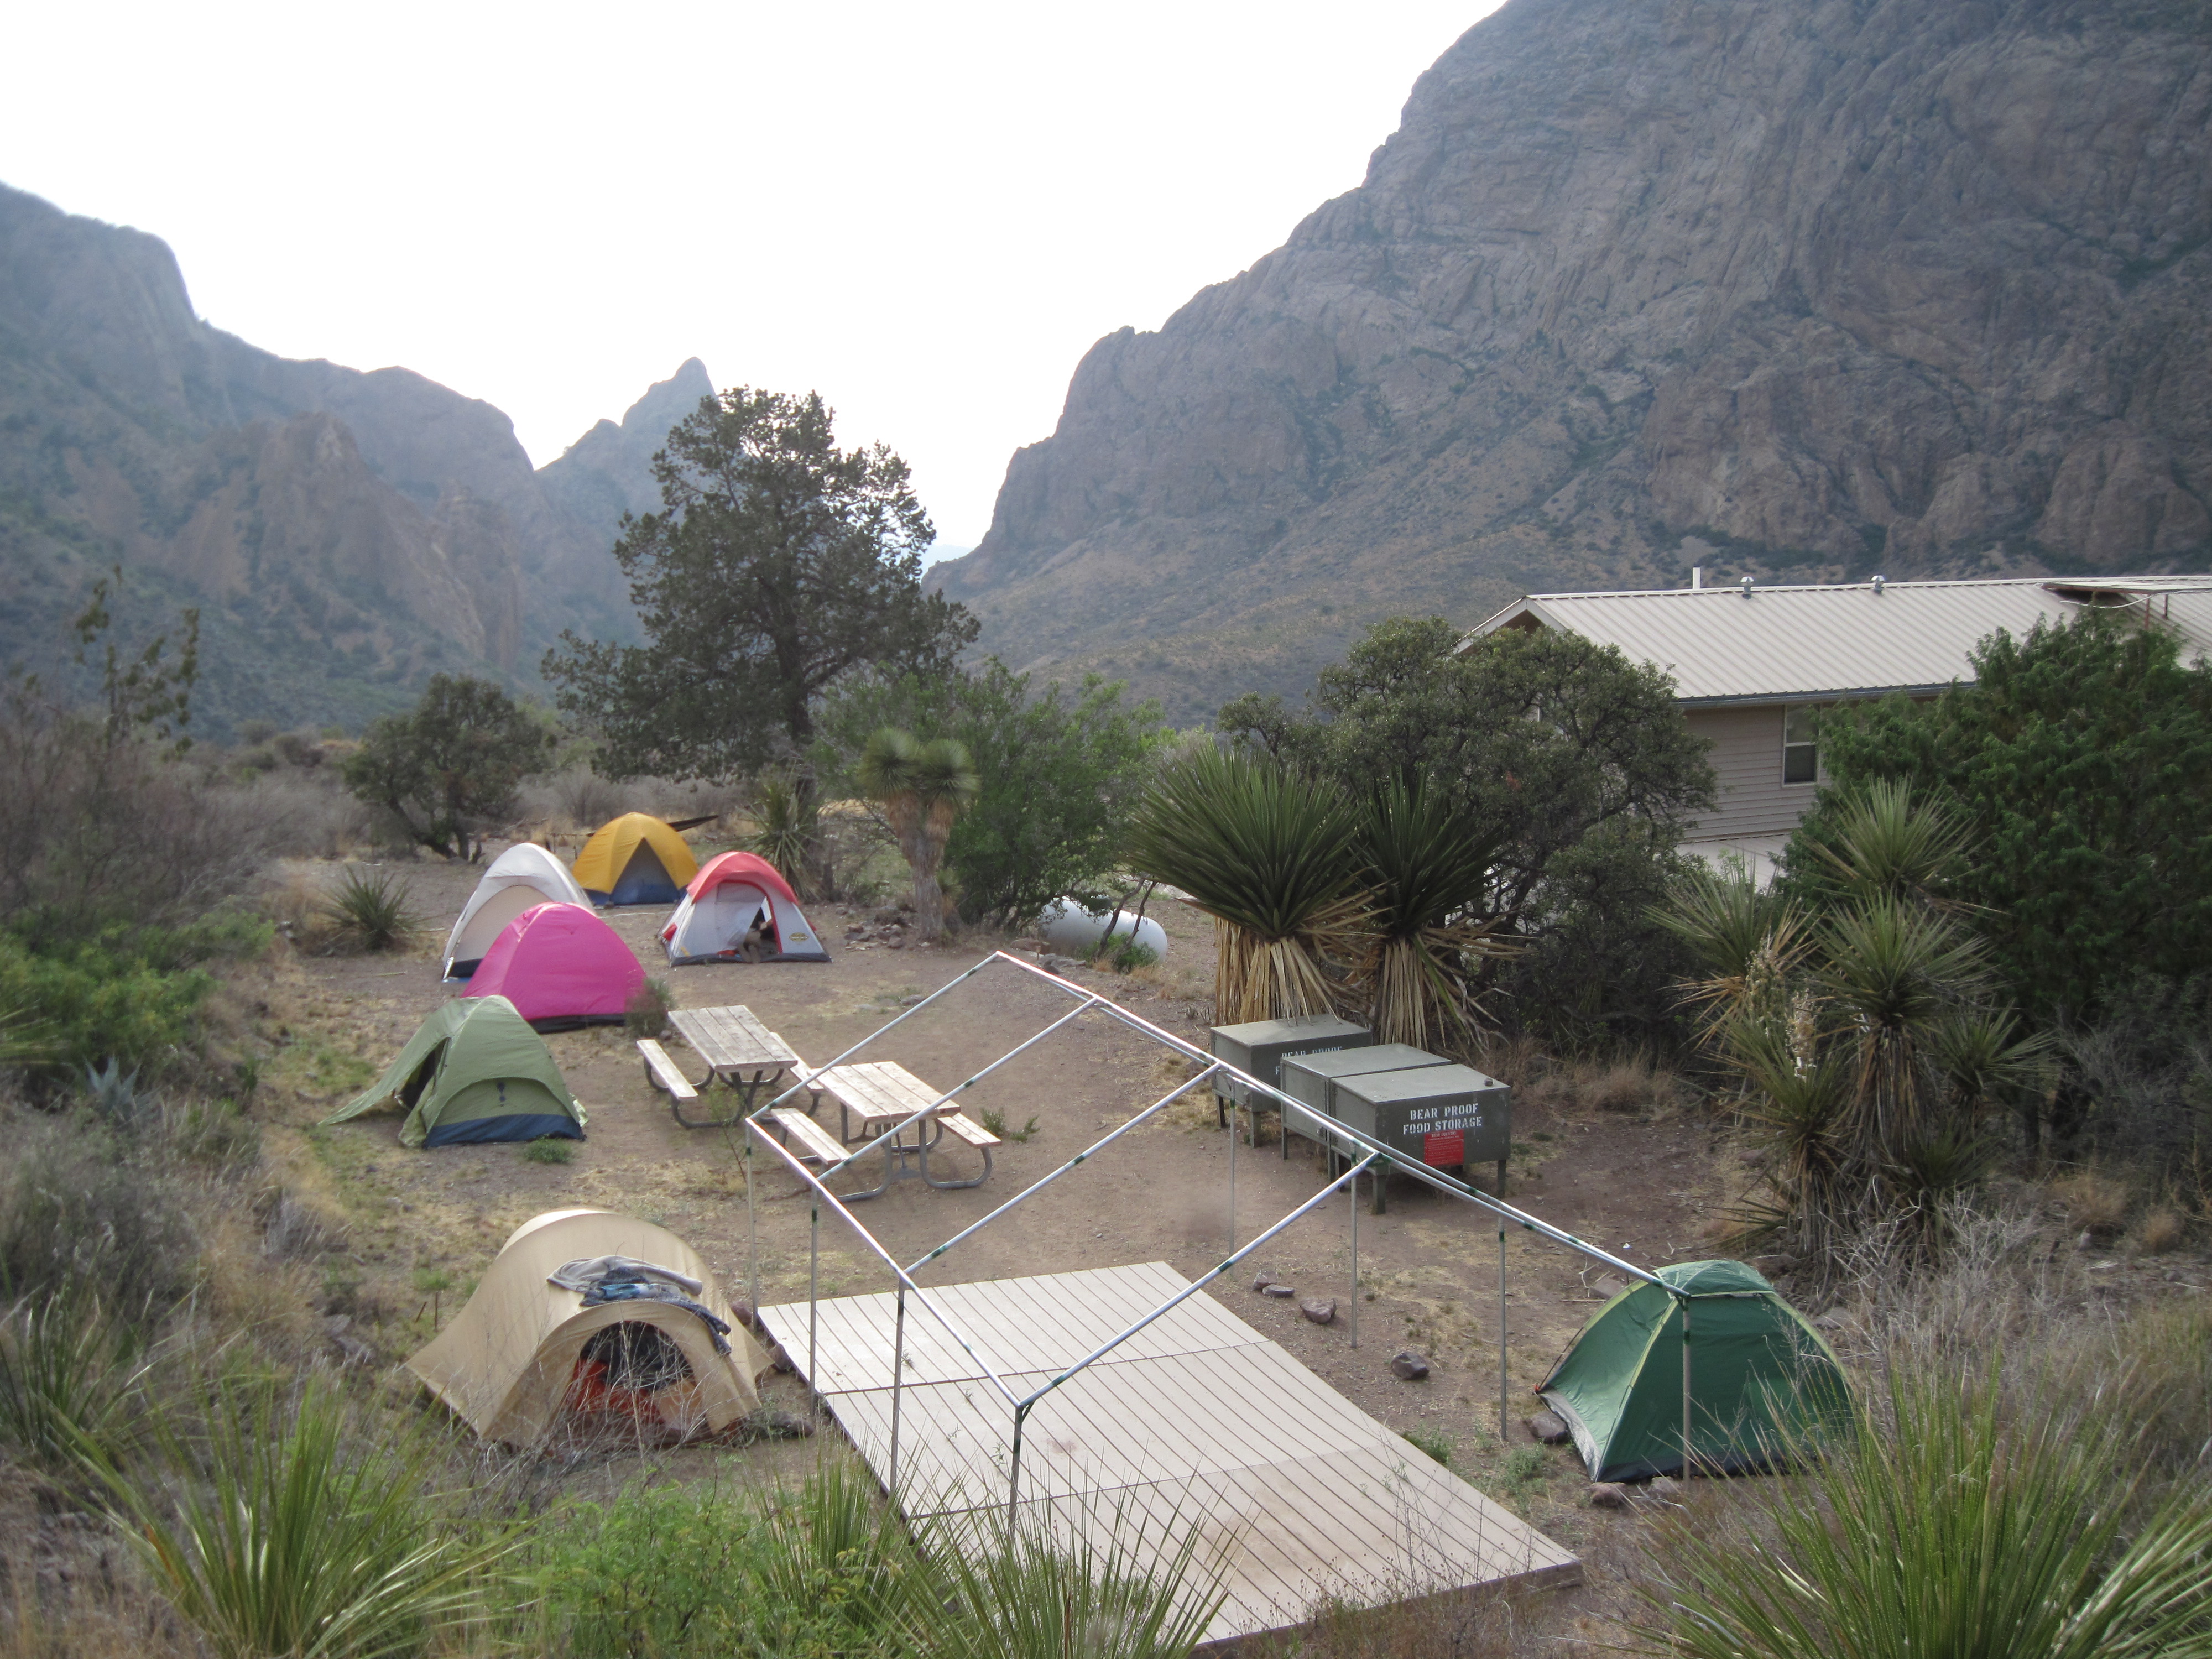 Big Bend Camping in 2014